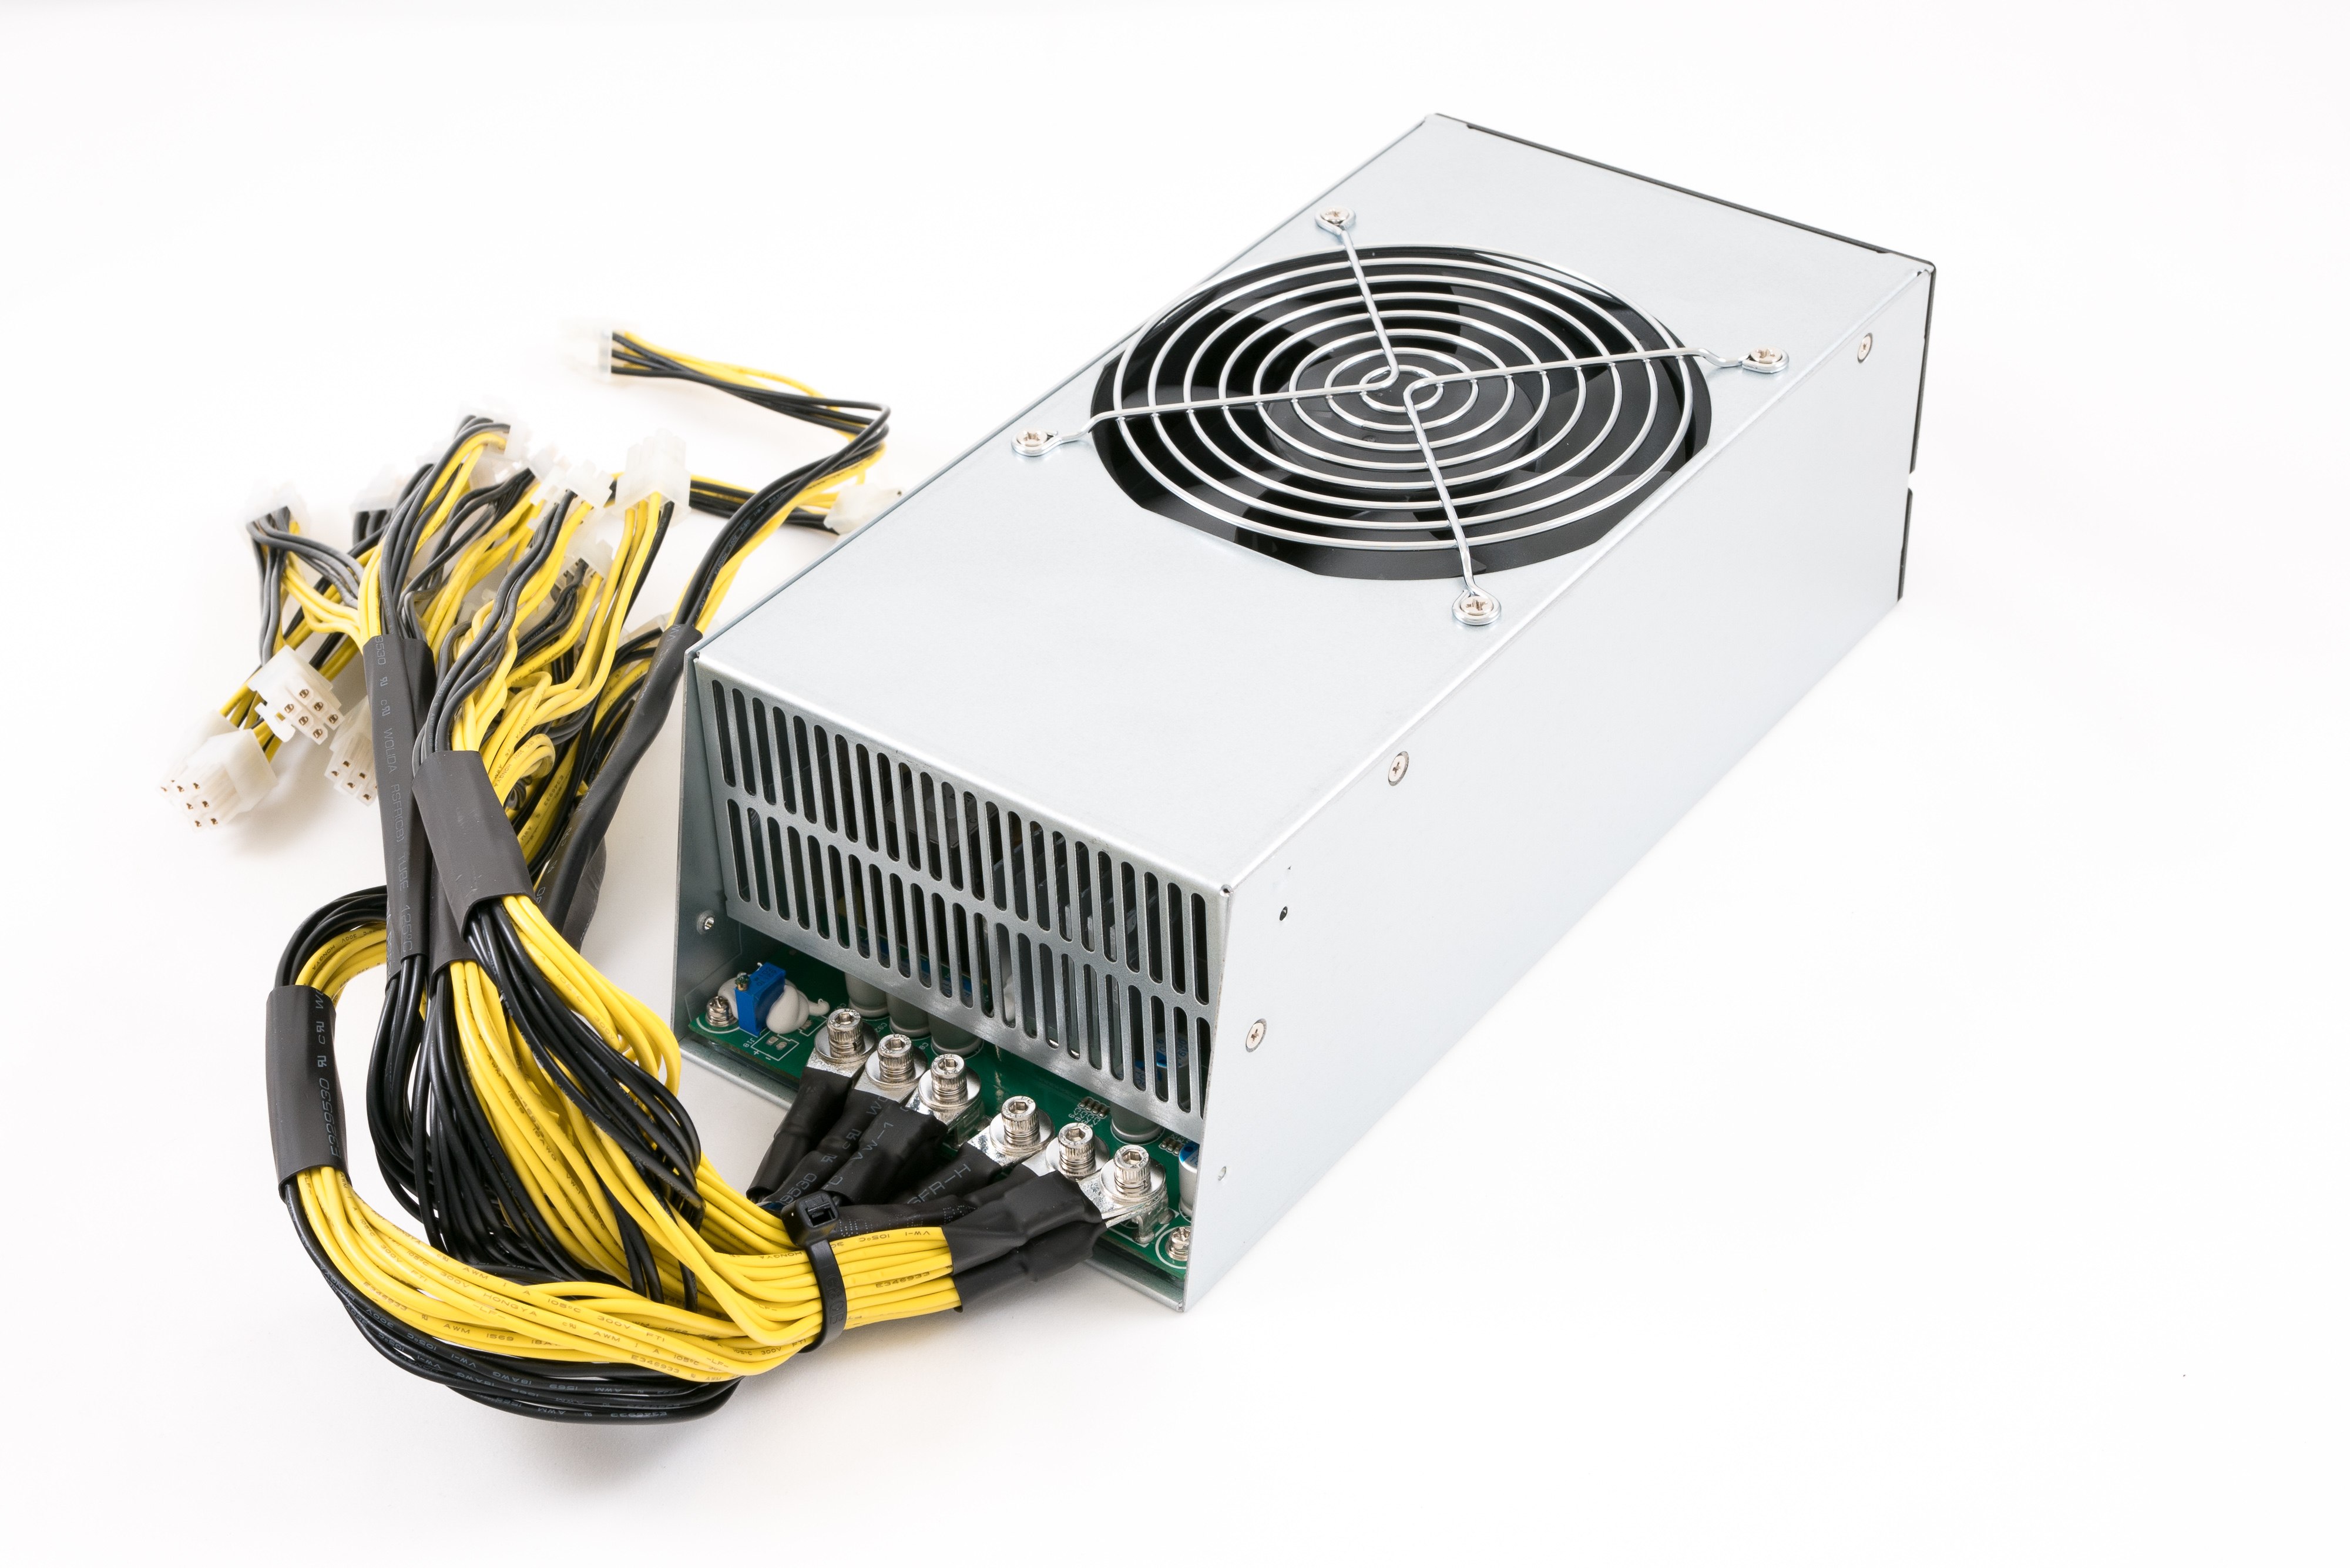 Antminer s15 review